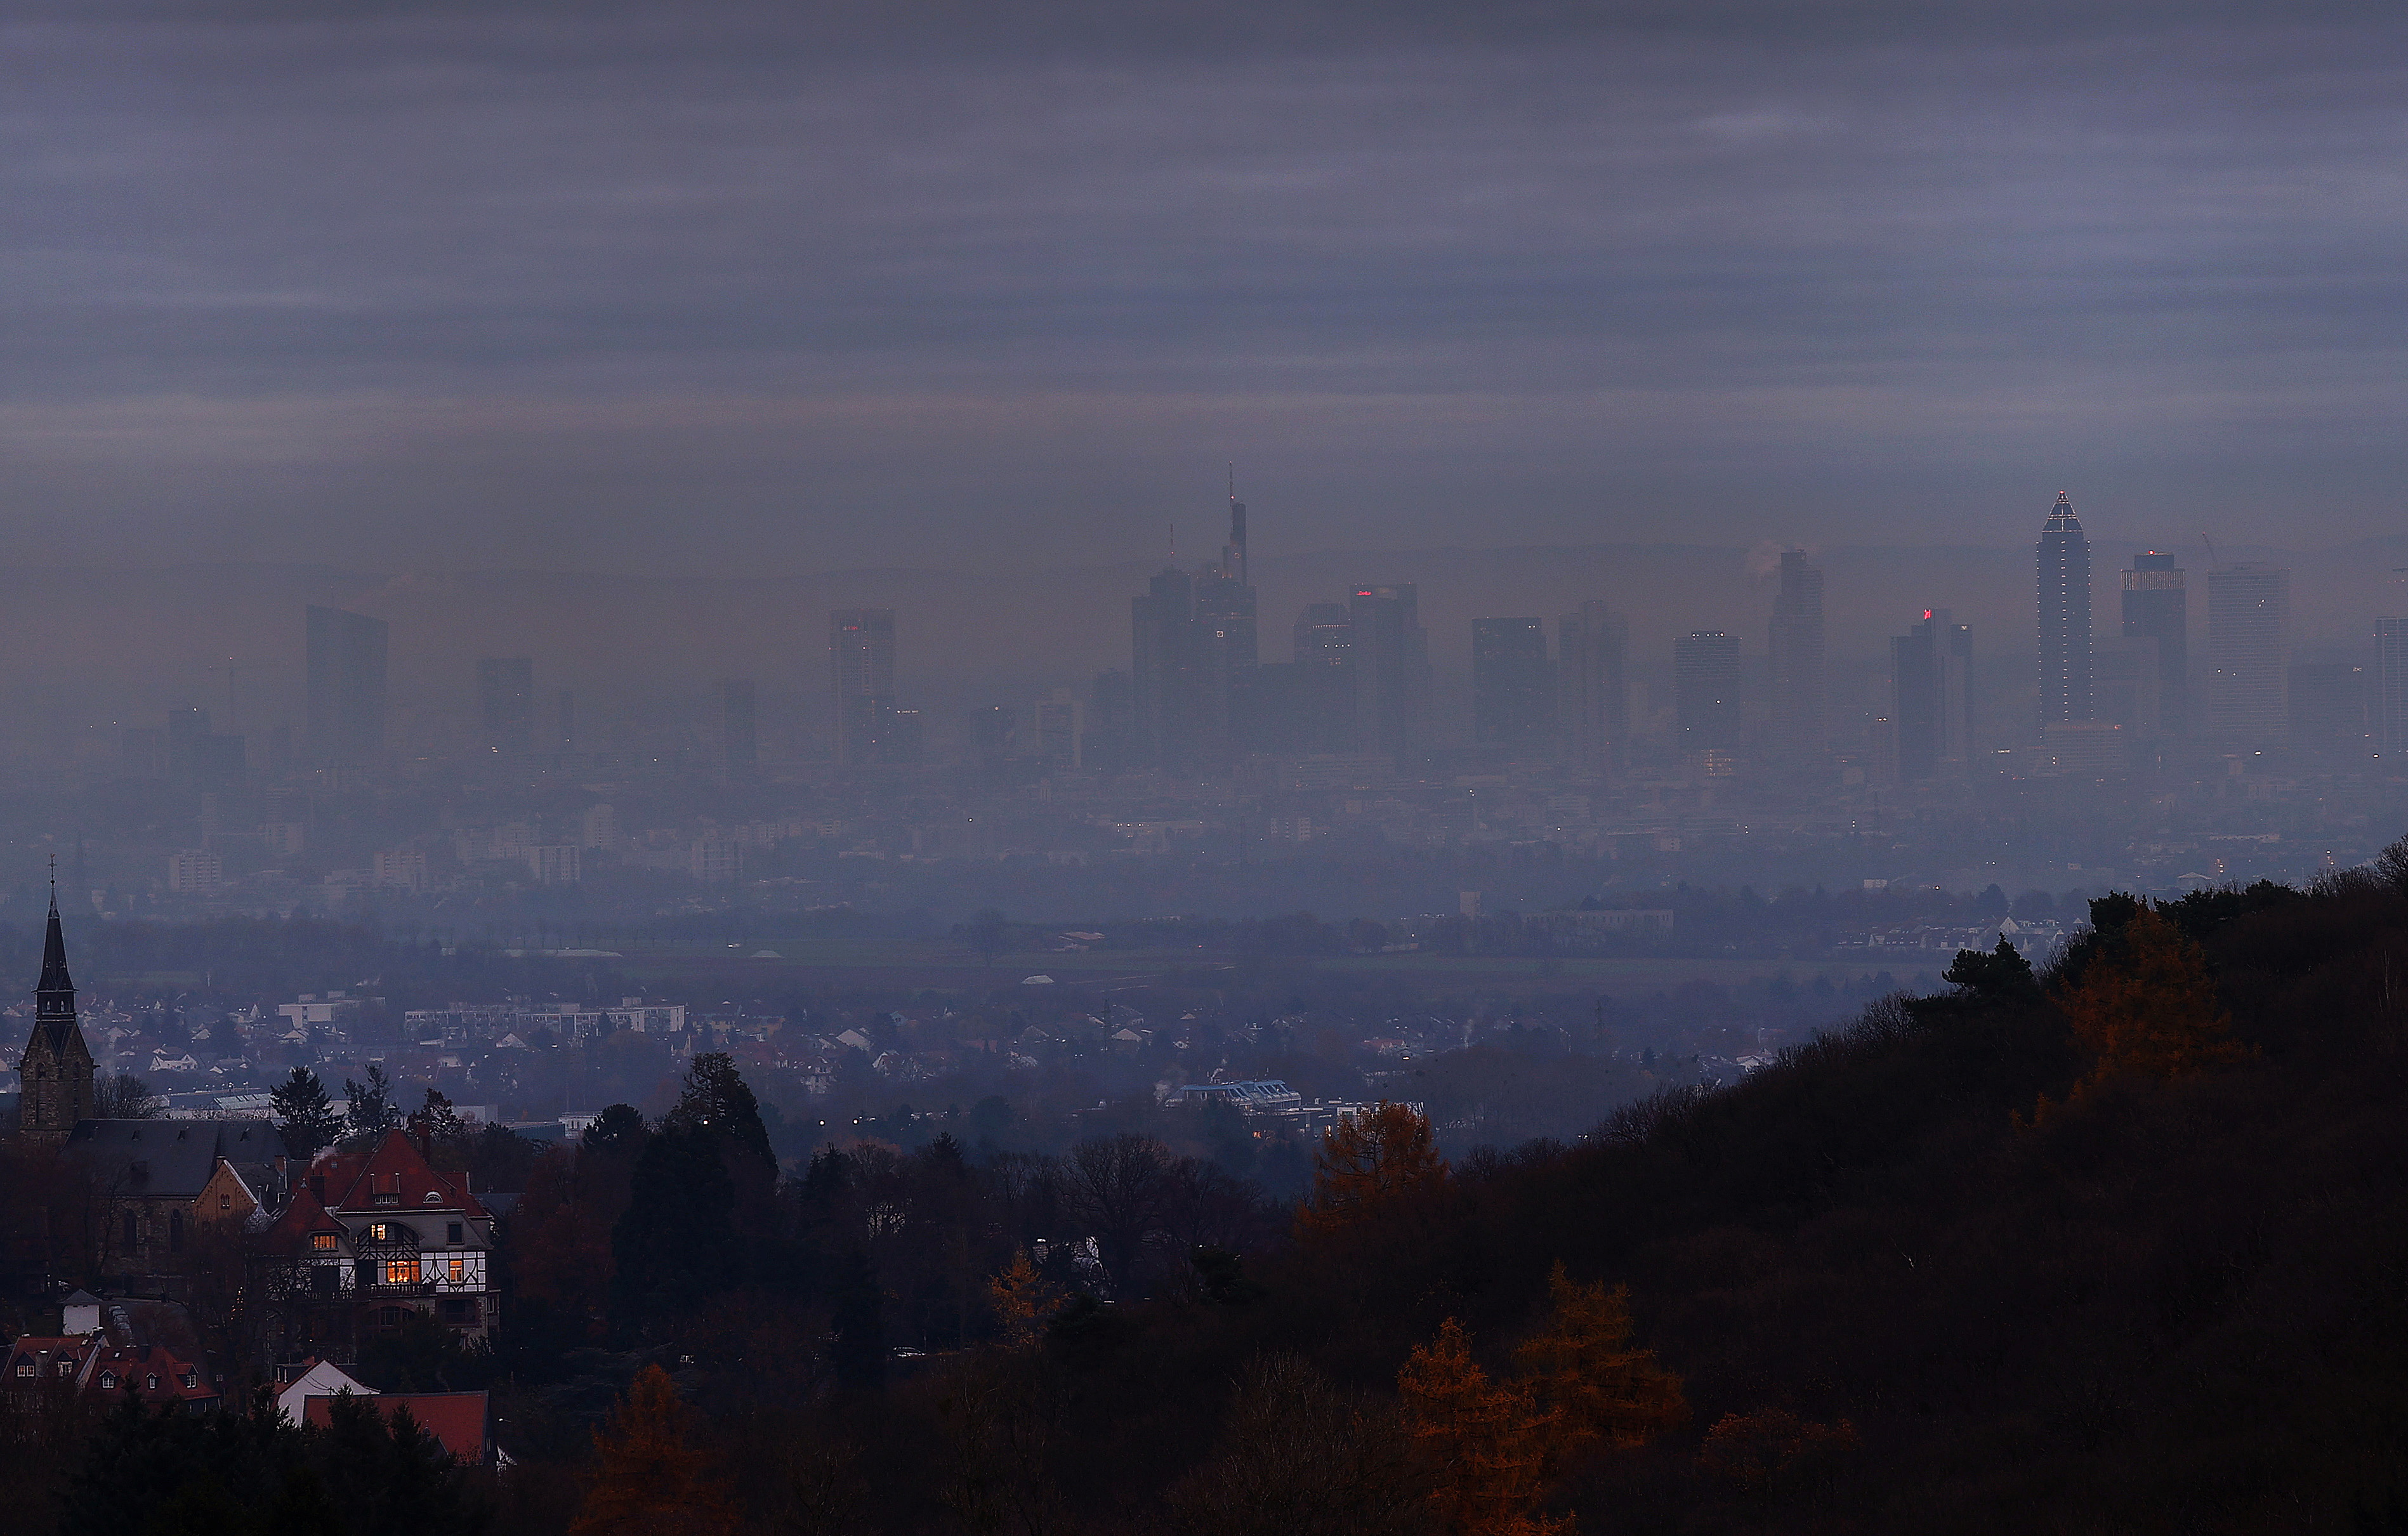 A house is illuminated in front of the skyline of Frankfurt as the spread of the coronavirus disease (COVID-19) continues during a foggy morning in Kronberg, Germany, November 24, 2021.  REUTERS/Kai Pfaffenbach